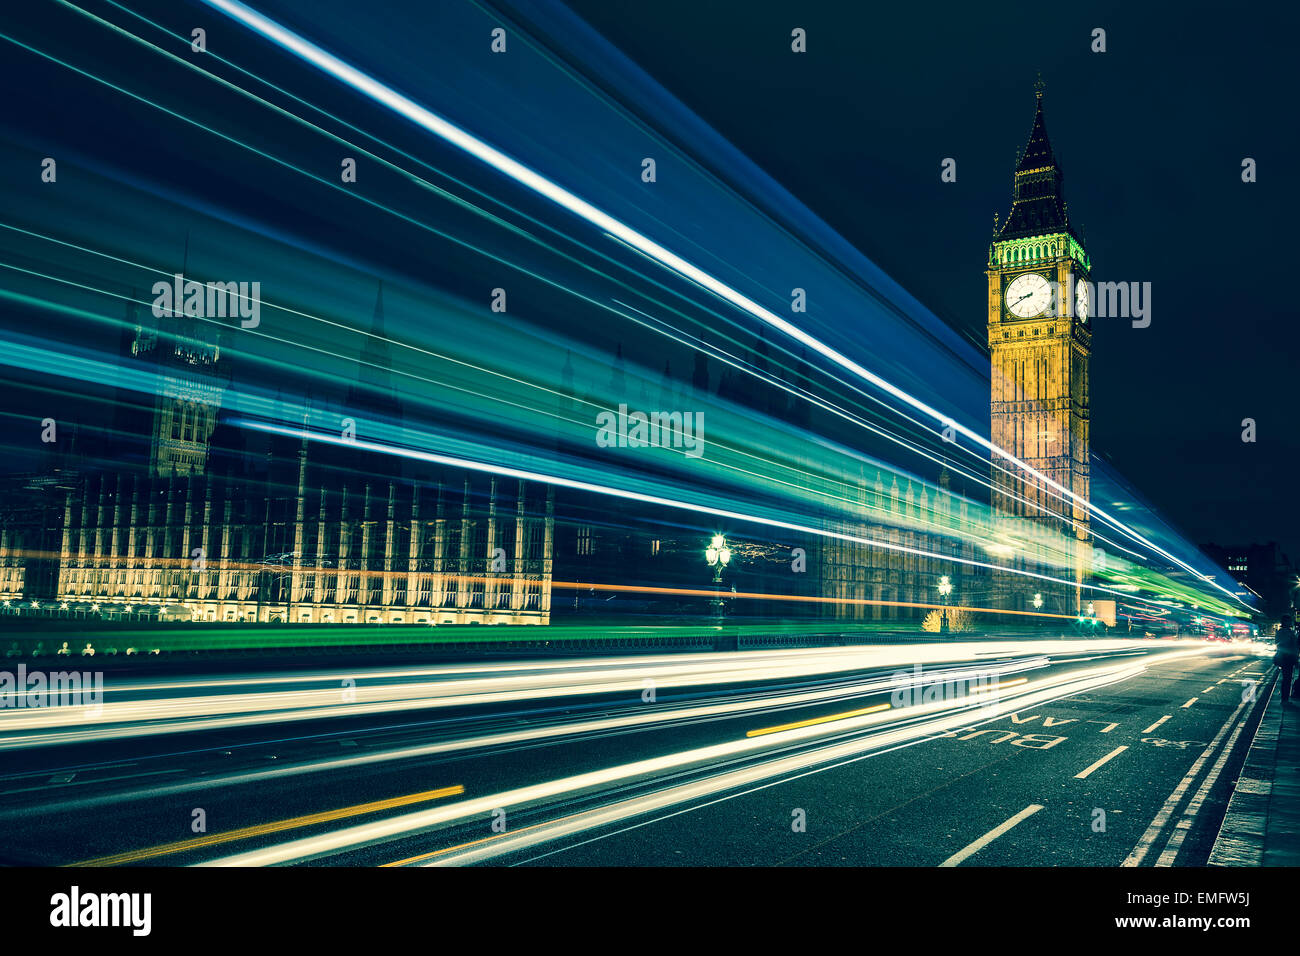 Big Ben, one of the most prominent symbols of both London and England, as shown at night along with the lights of the cars passi Stock Photo